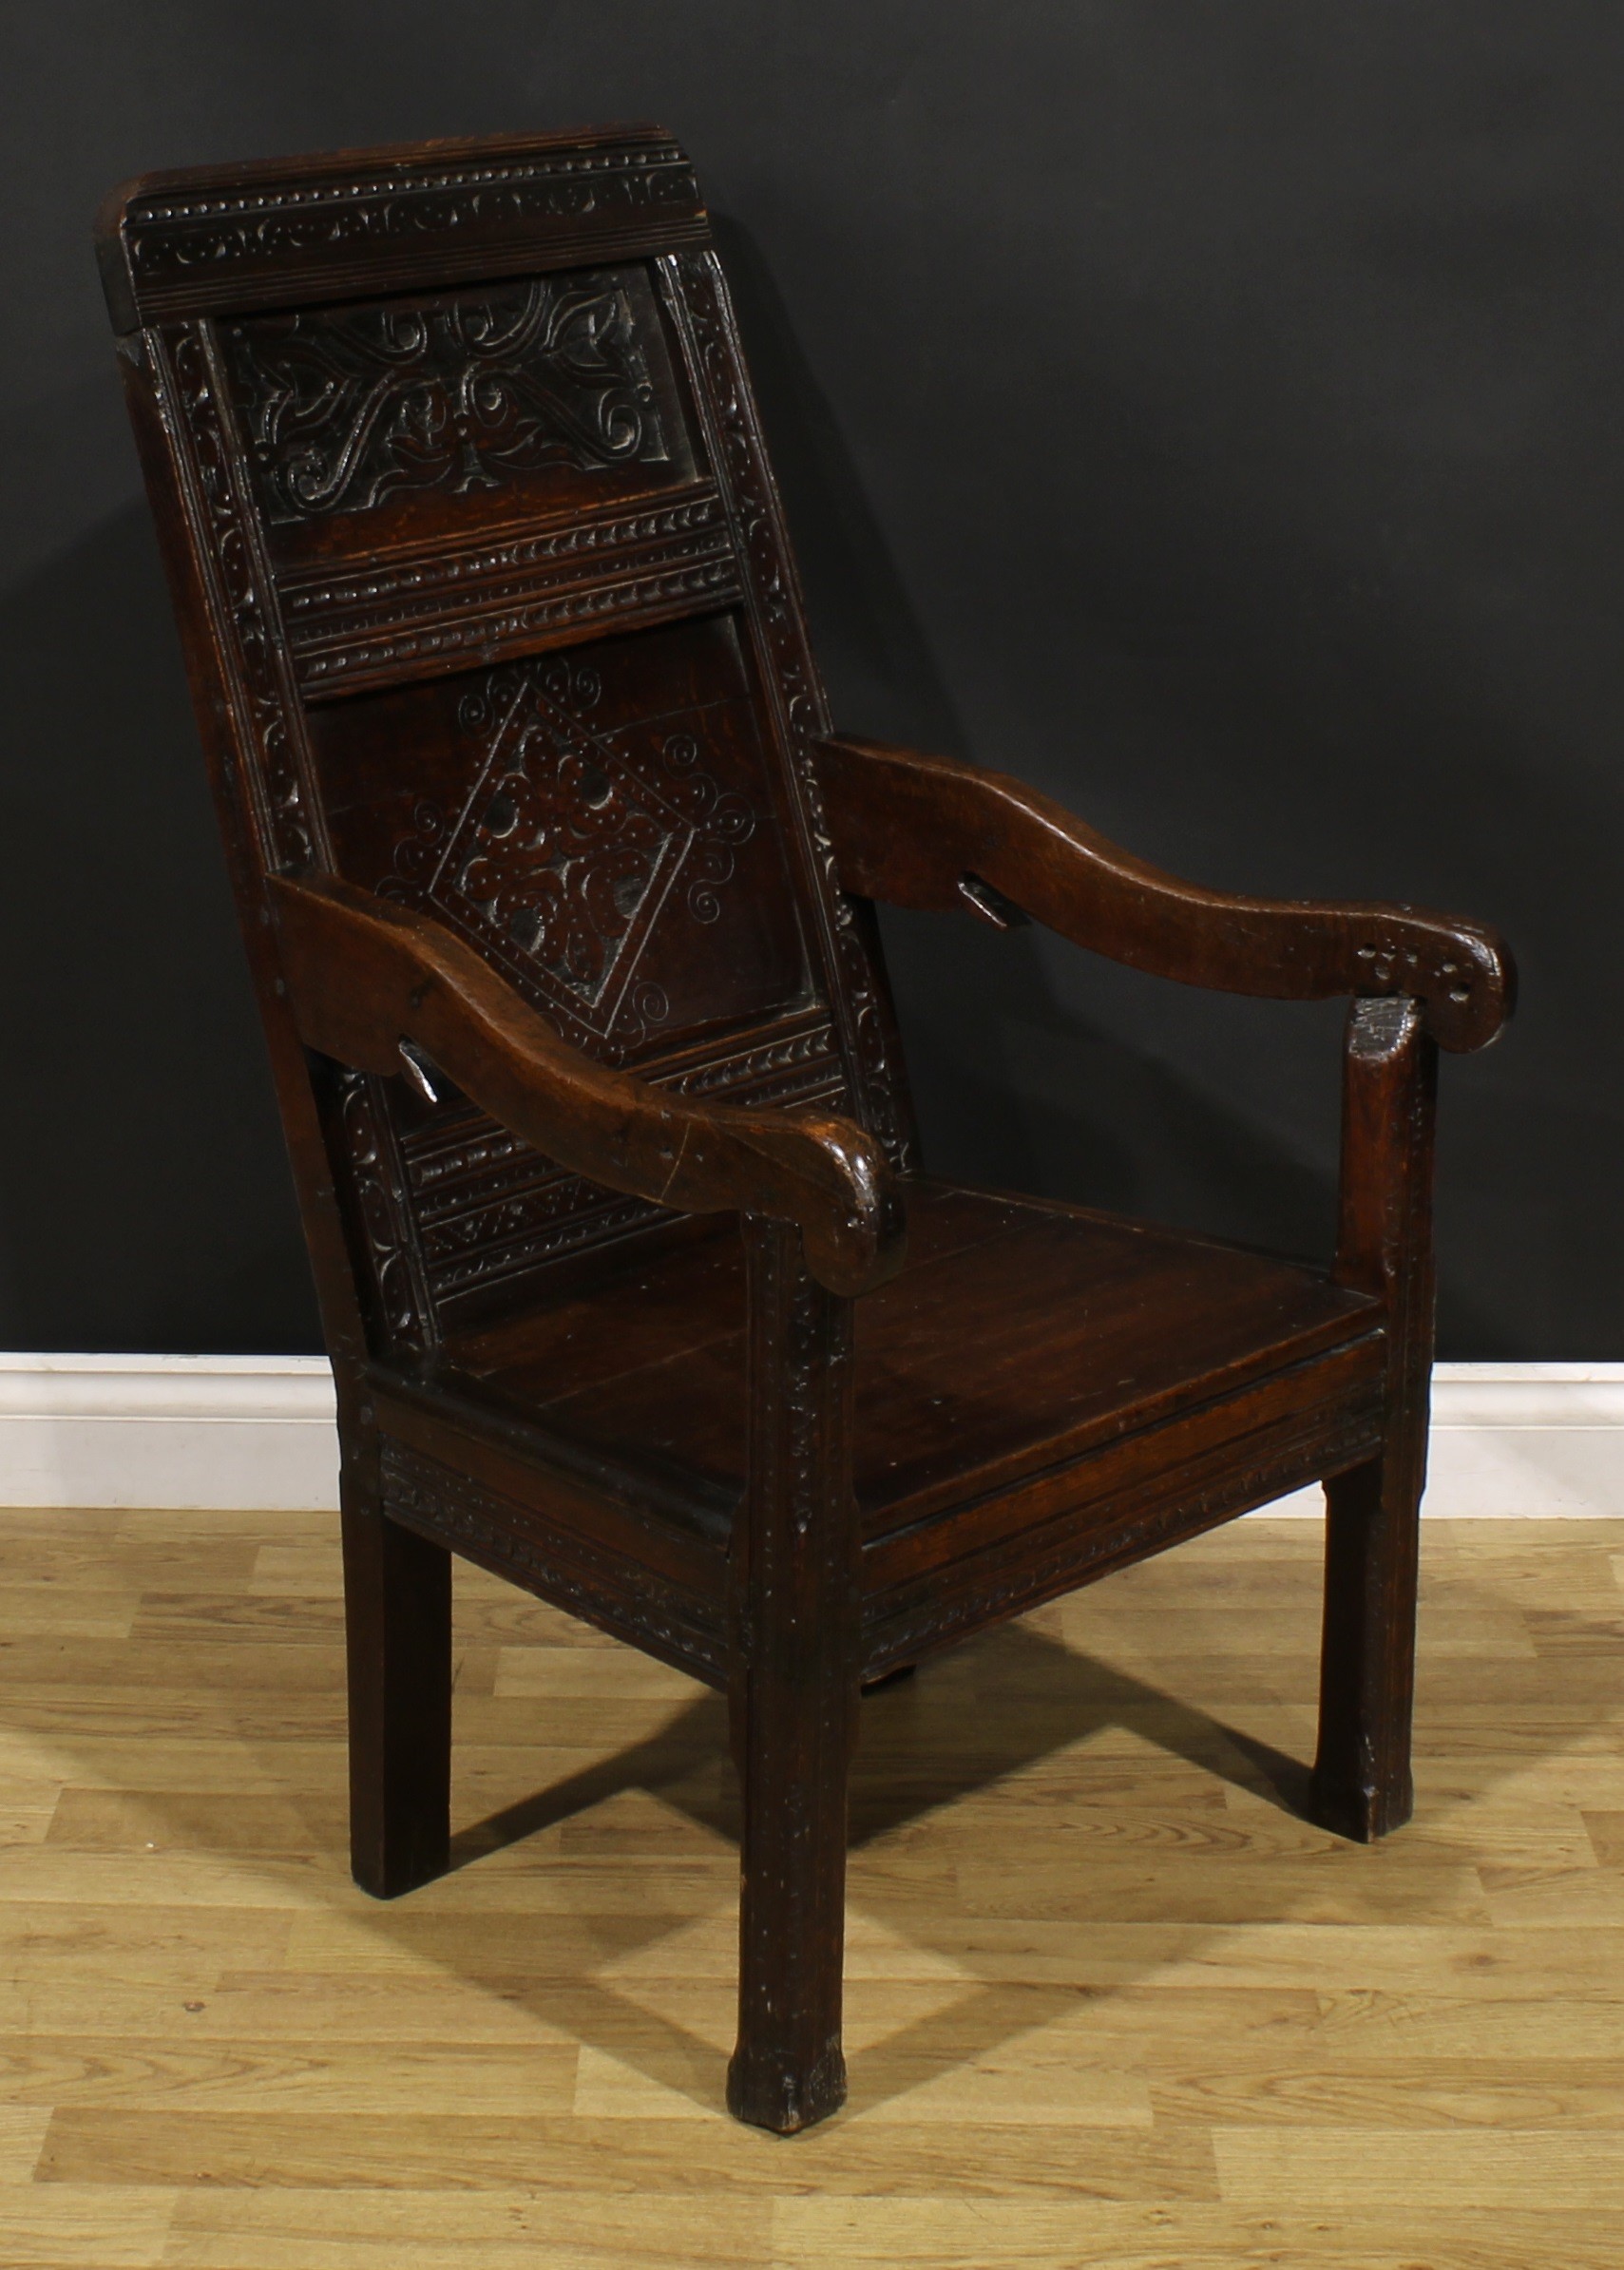 A 17th century oak wainscot armchair, rectangular panel back carved with lozenges and leafy scrolls, - Image 2 of 4